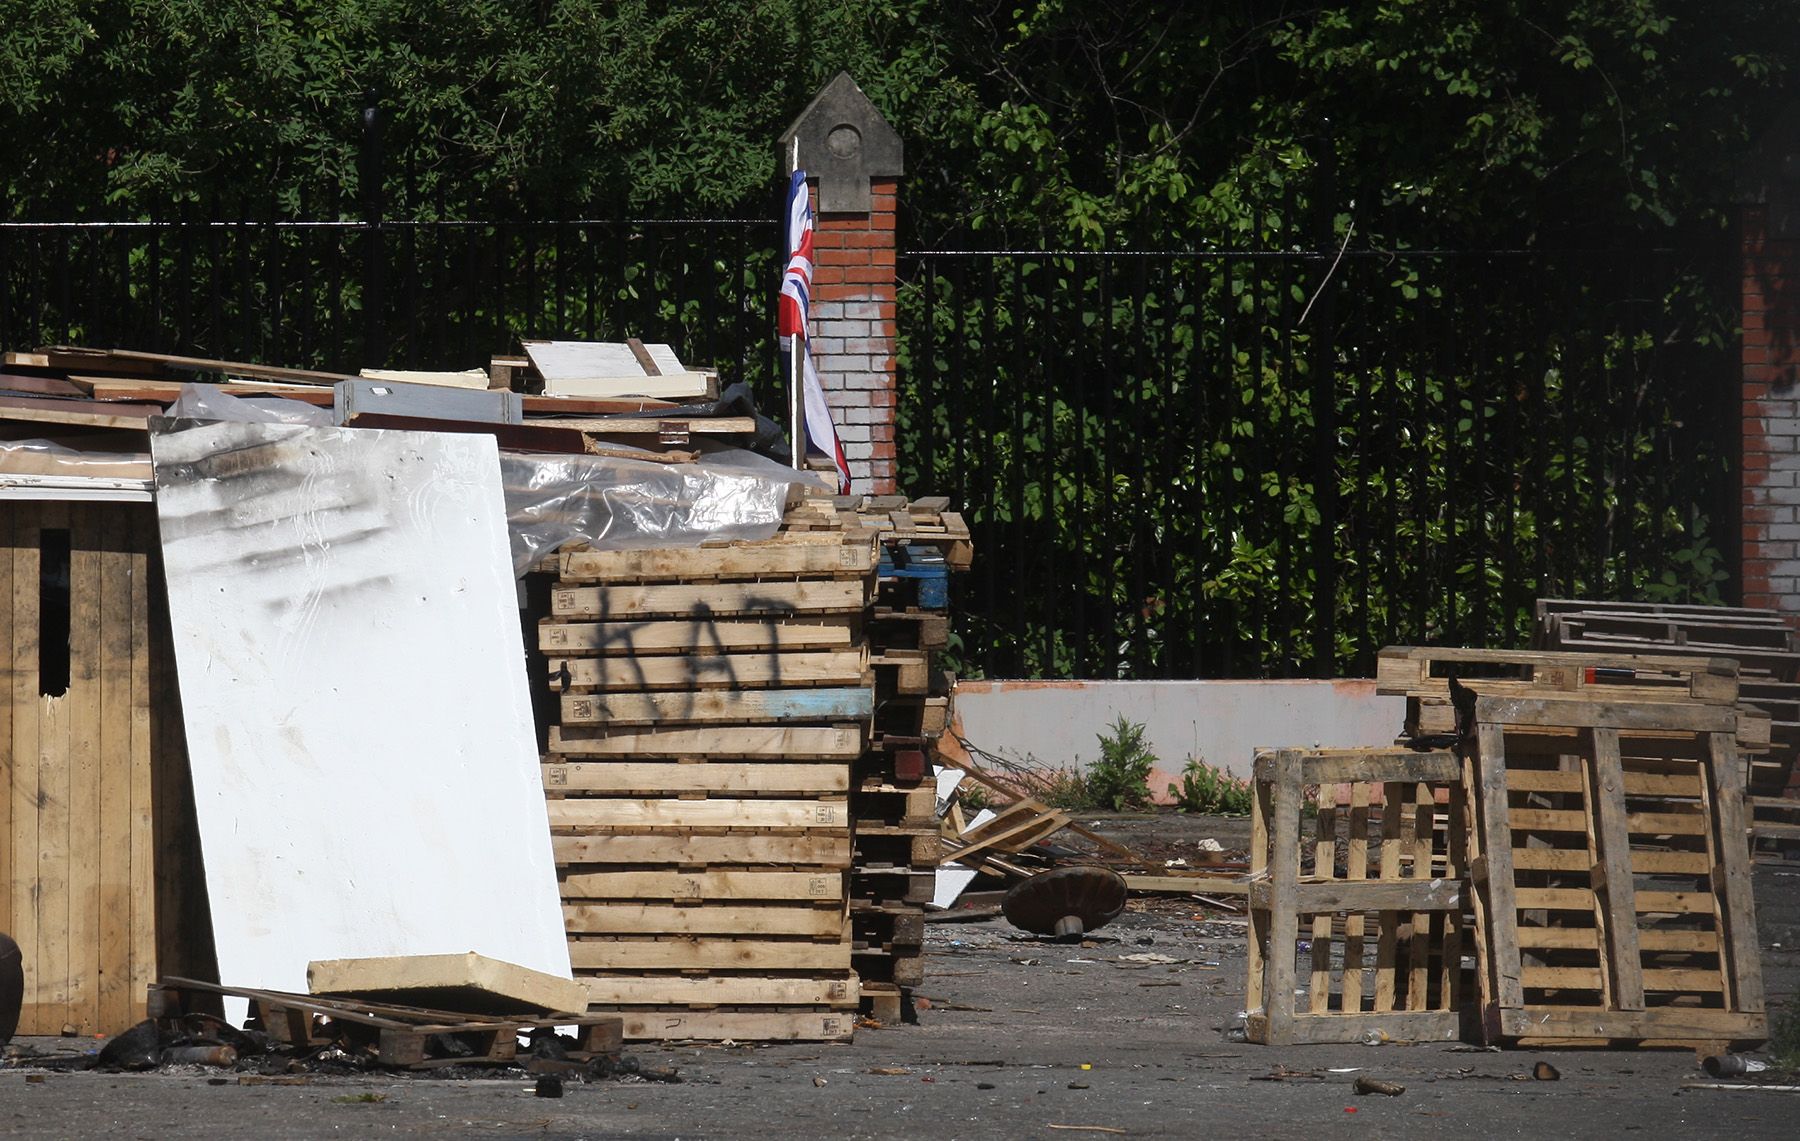 CONTROVERSIAL: Materials have started to be gathered the loyalist bonfire in Adam Street at the Tigers Bay/New Lodge interface